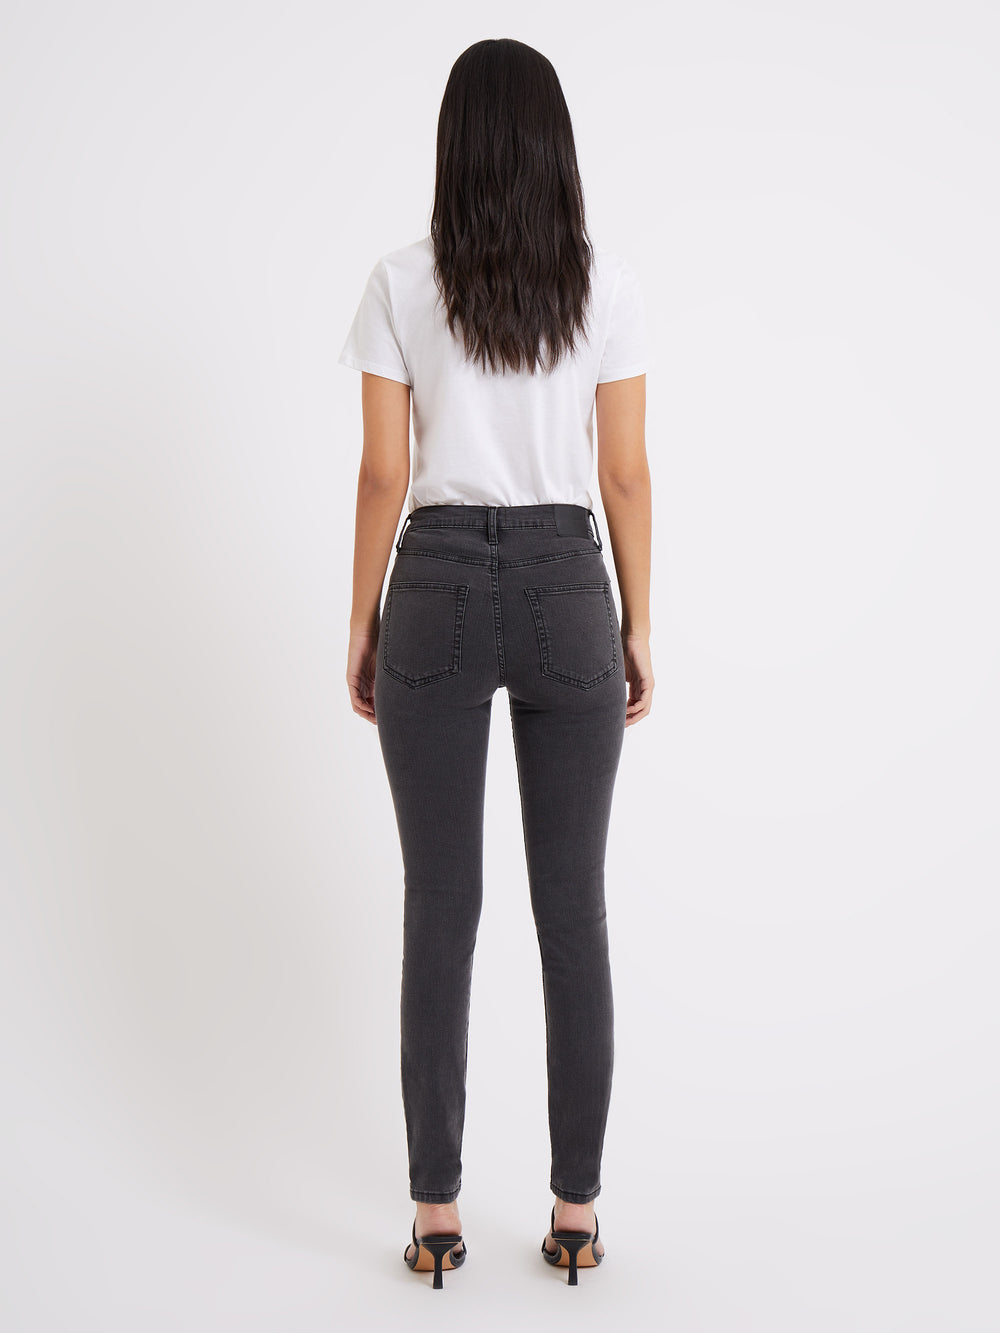 Rebound Response Skinny Jeans 30 Inch Charcoal | French Connection UK